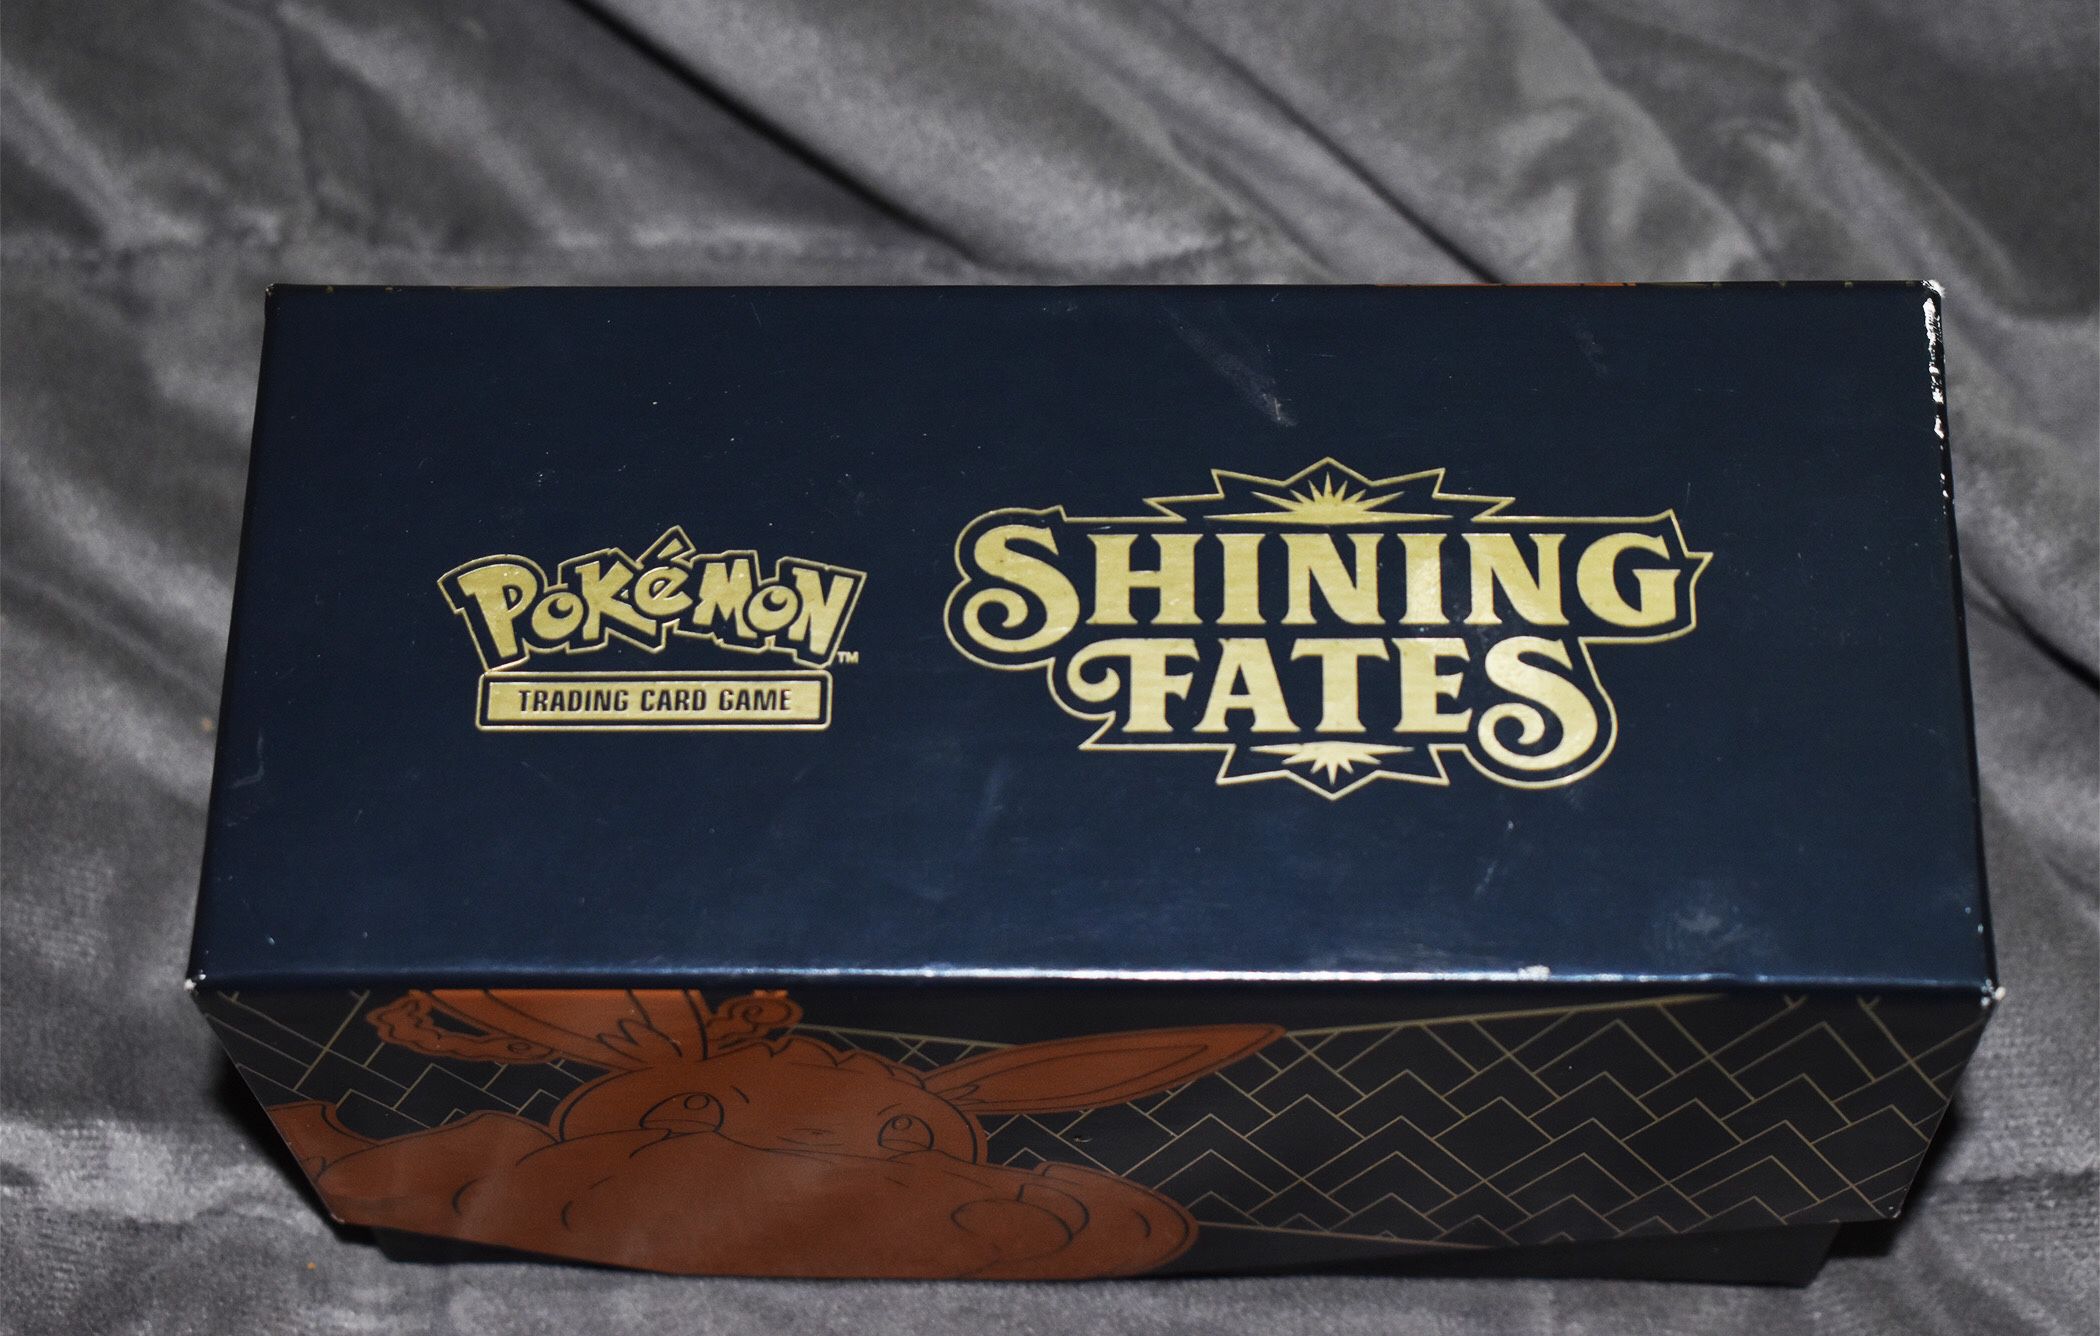 Shining Fates Used As Well As Random Cards And Packs. All In The Pictures!